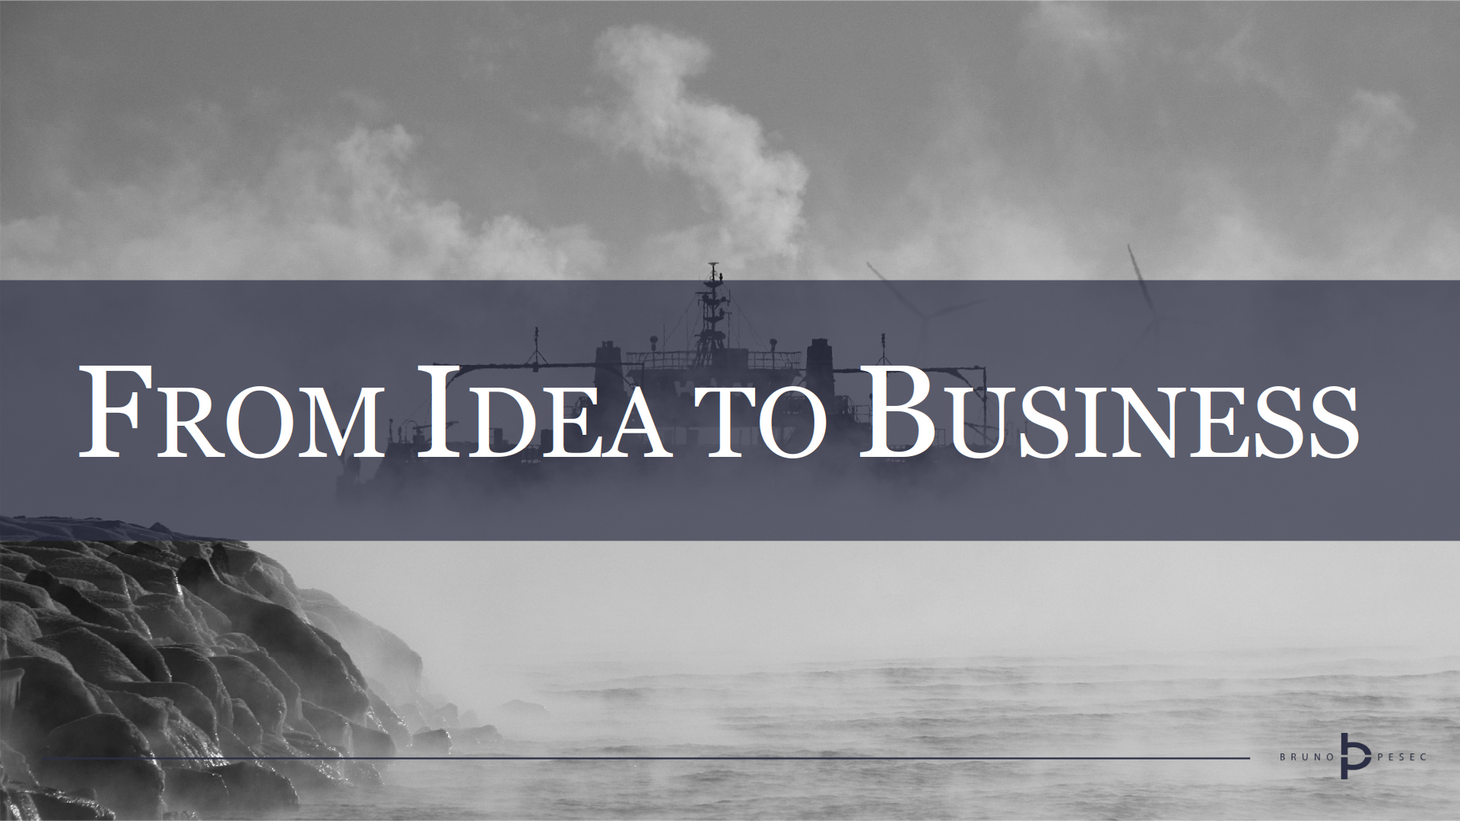 From idea to business